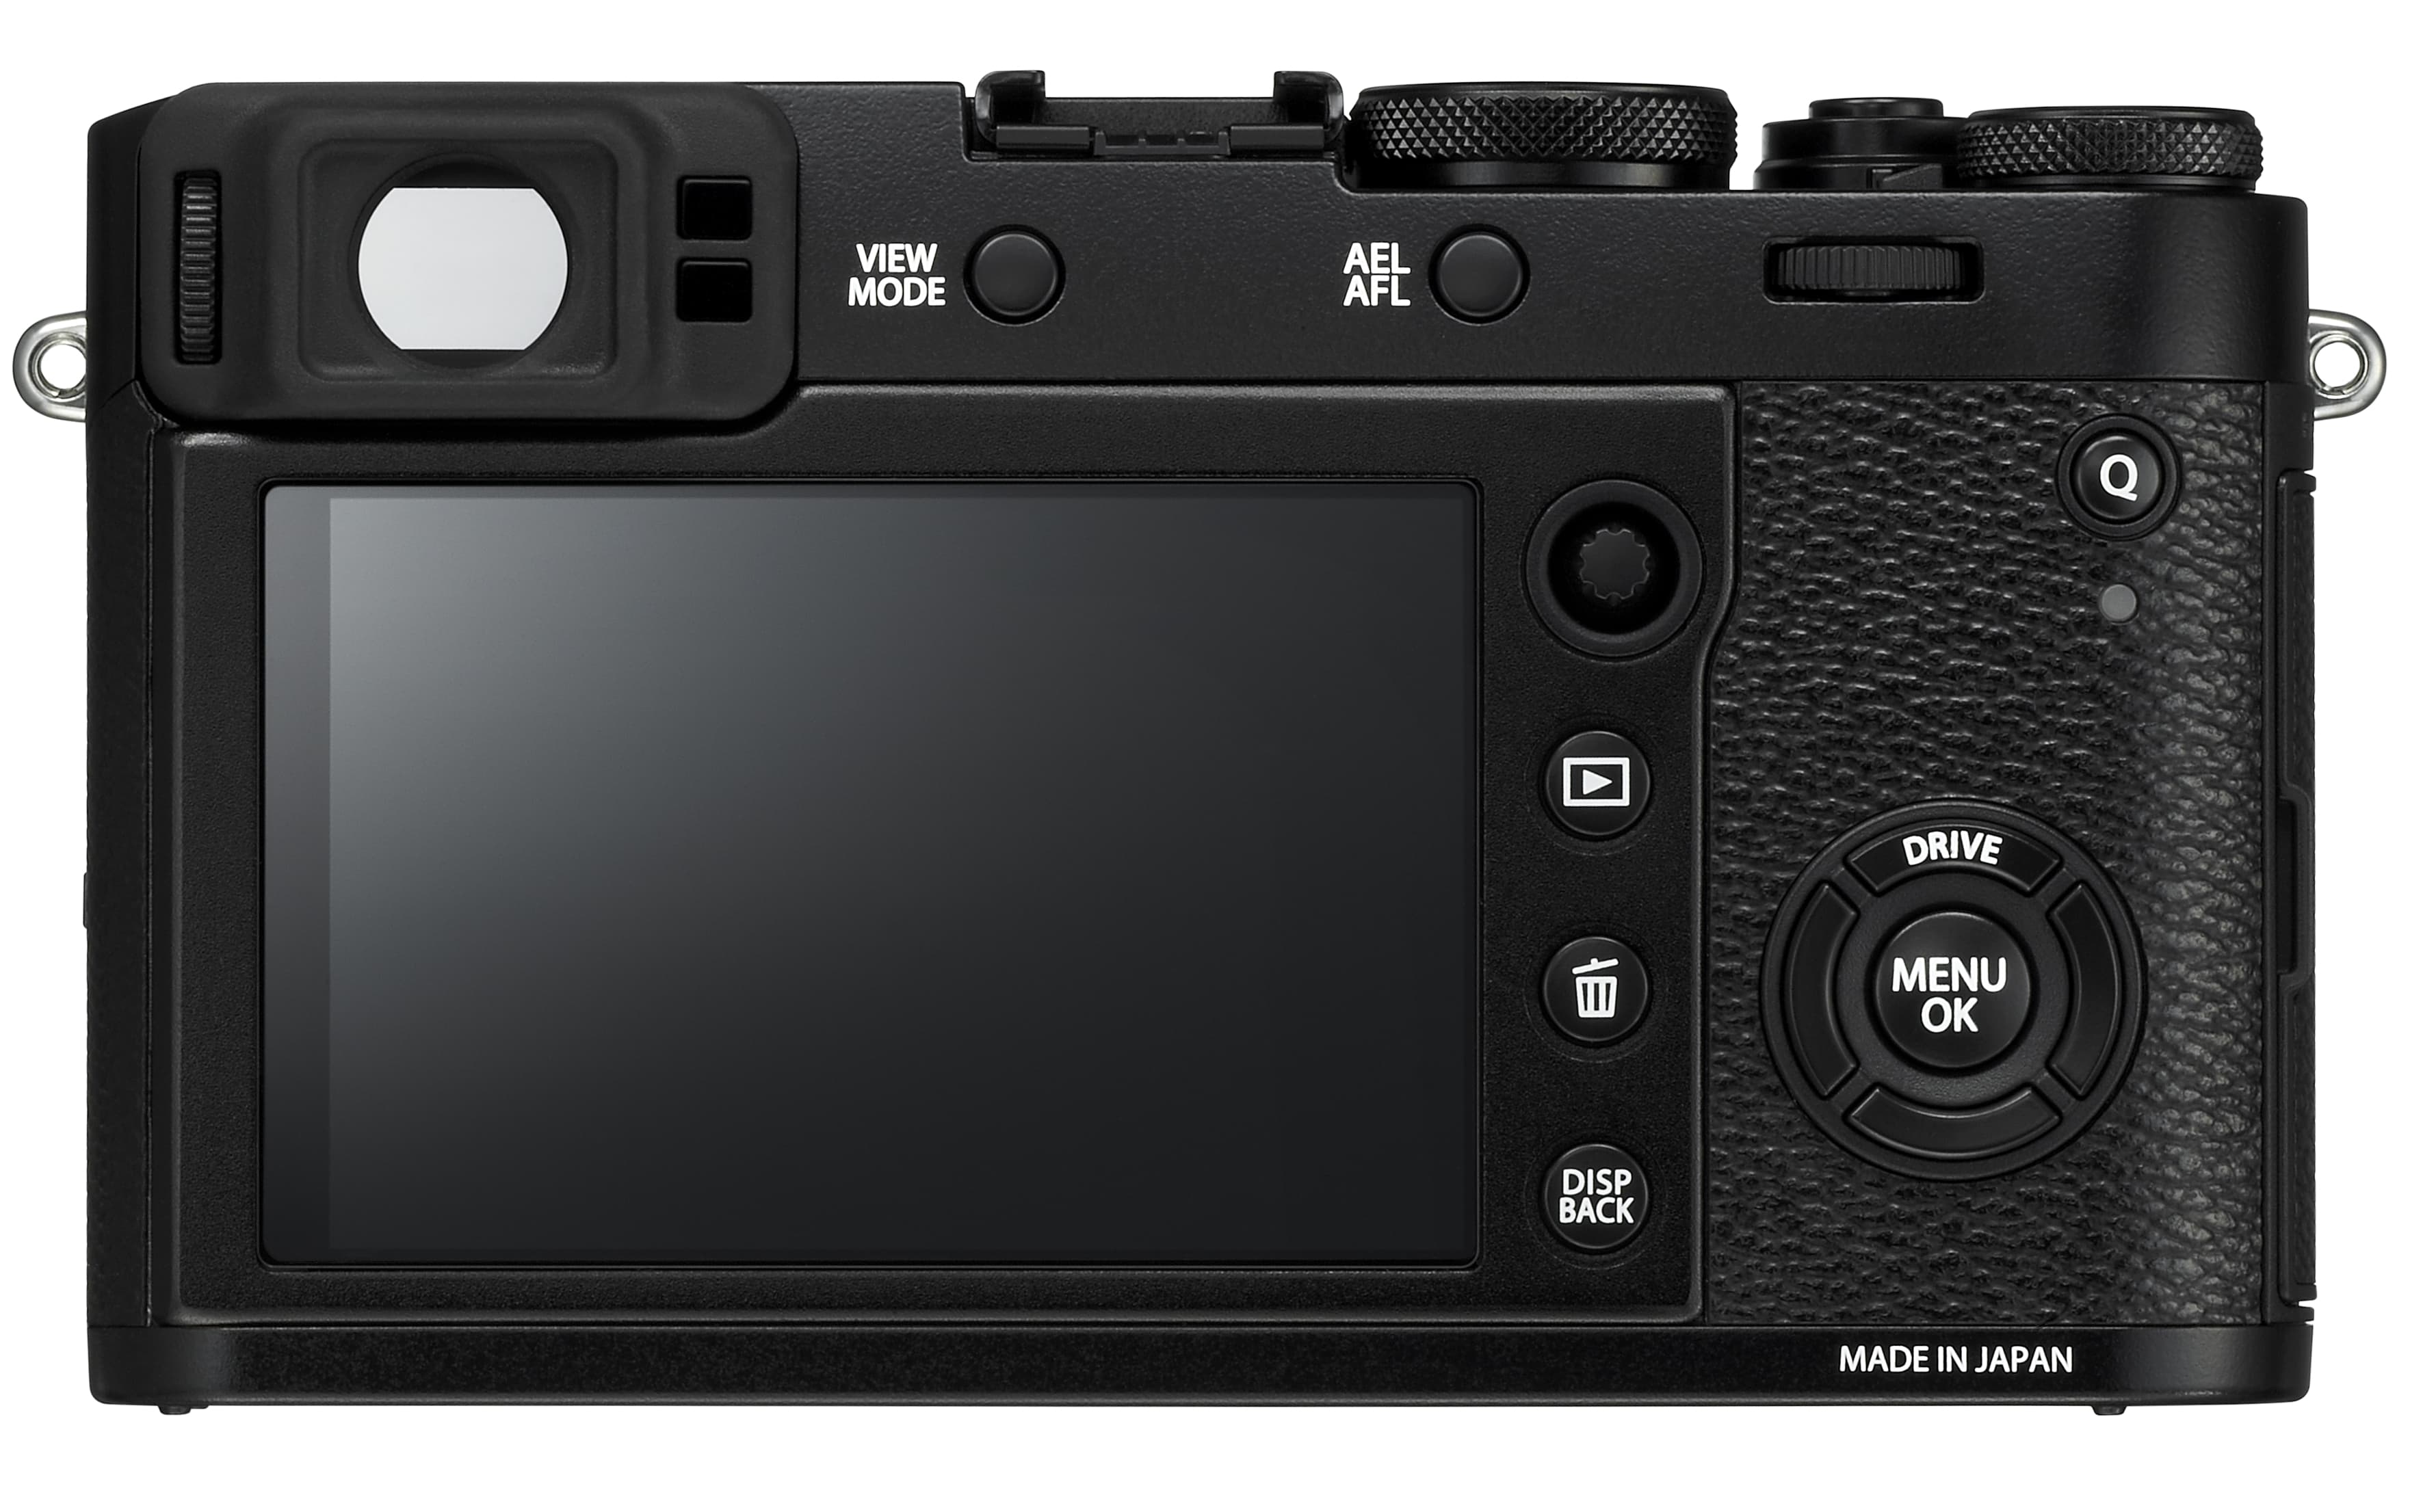 The hybrid viewfinder of the X100F is unique